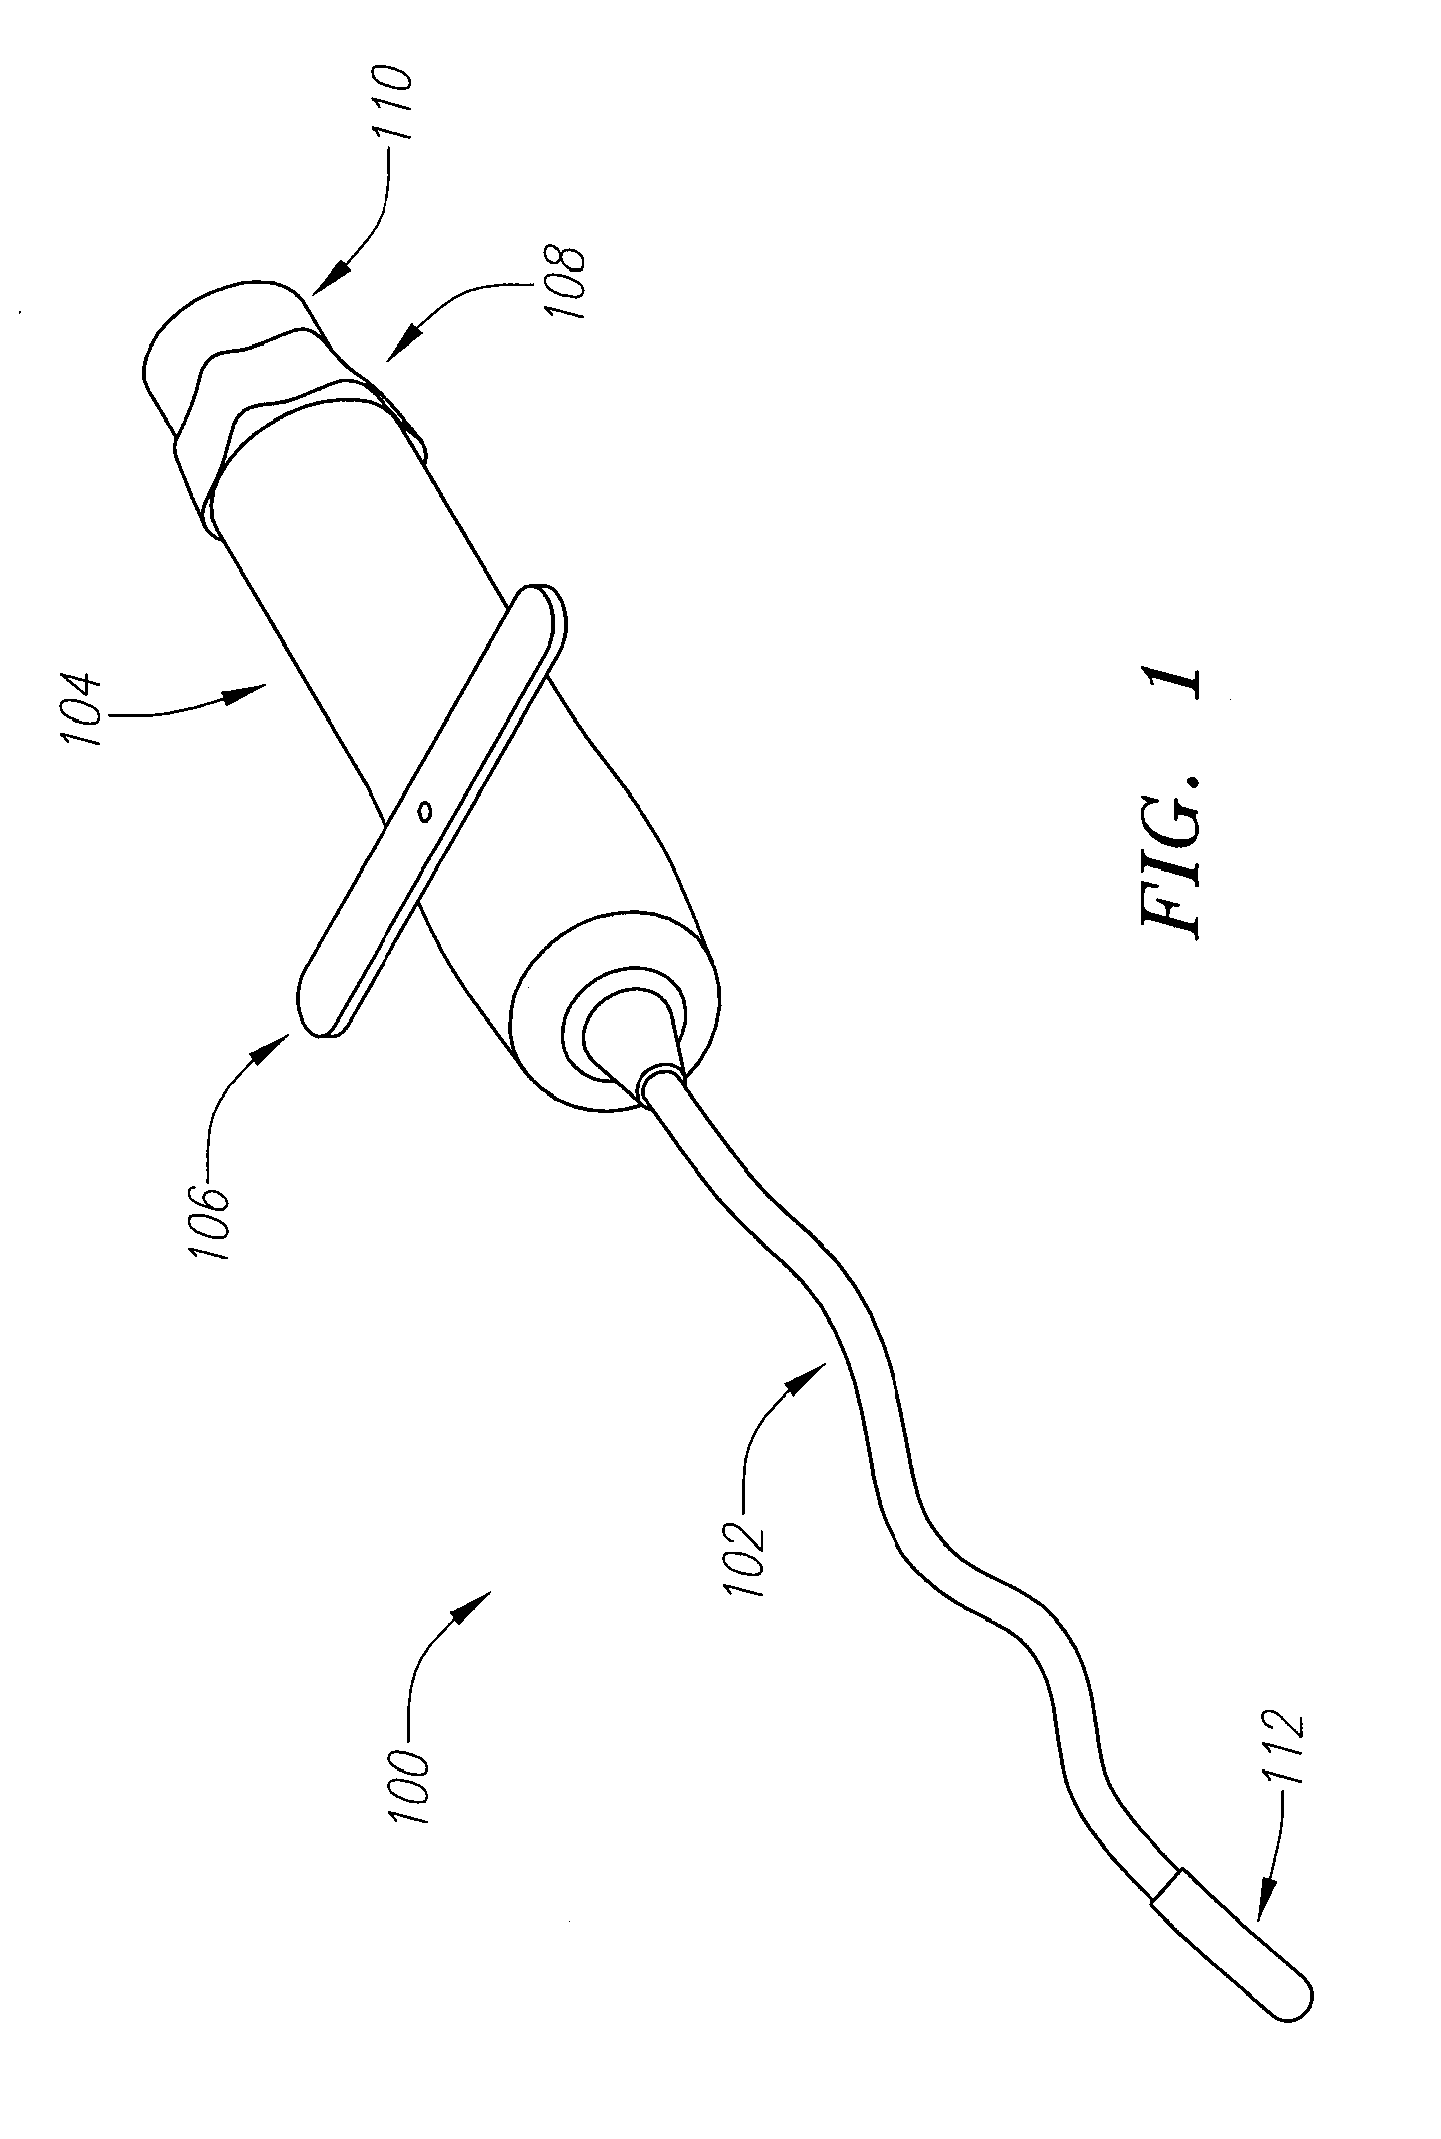 Elongate Flexible Torque Instruments And Methods Of Use